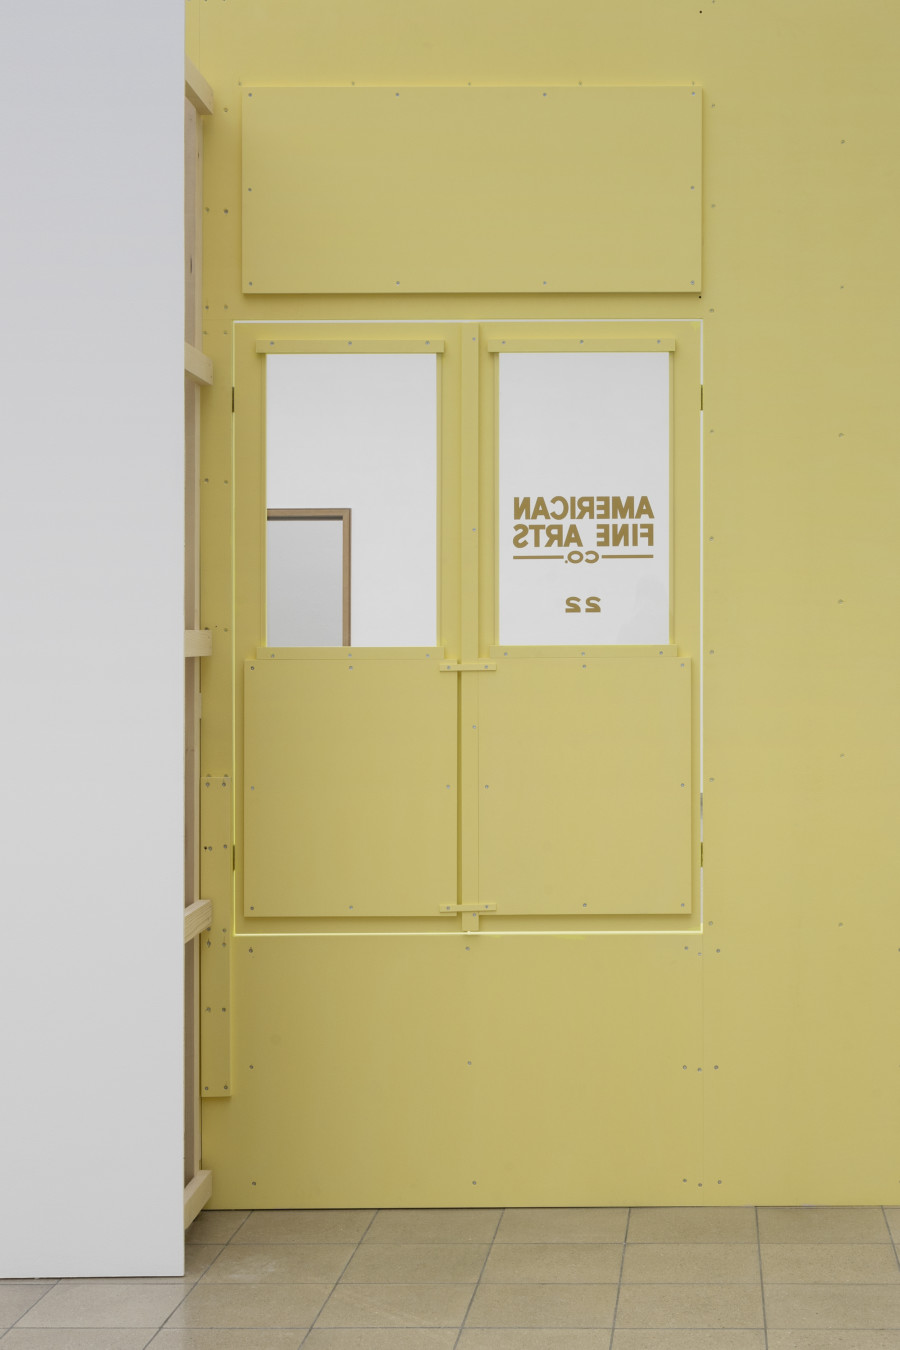 Megan Francis Sullivan, Study of a facade, American Fine Arts at 22 Wooster Street, New York, circa 2002, detail, 2024. Wood, plexiglass, drywall, window decal, approx. 500 x 170 x 290 cm. Megan Francis Sullivan, Wolkenstudie, installation view, Kunsthaus Glarus, 2024. Photo: Gina Folly. Courtesy of the artist.